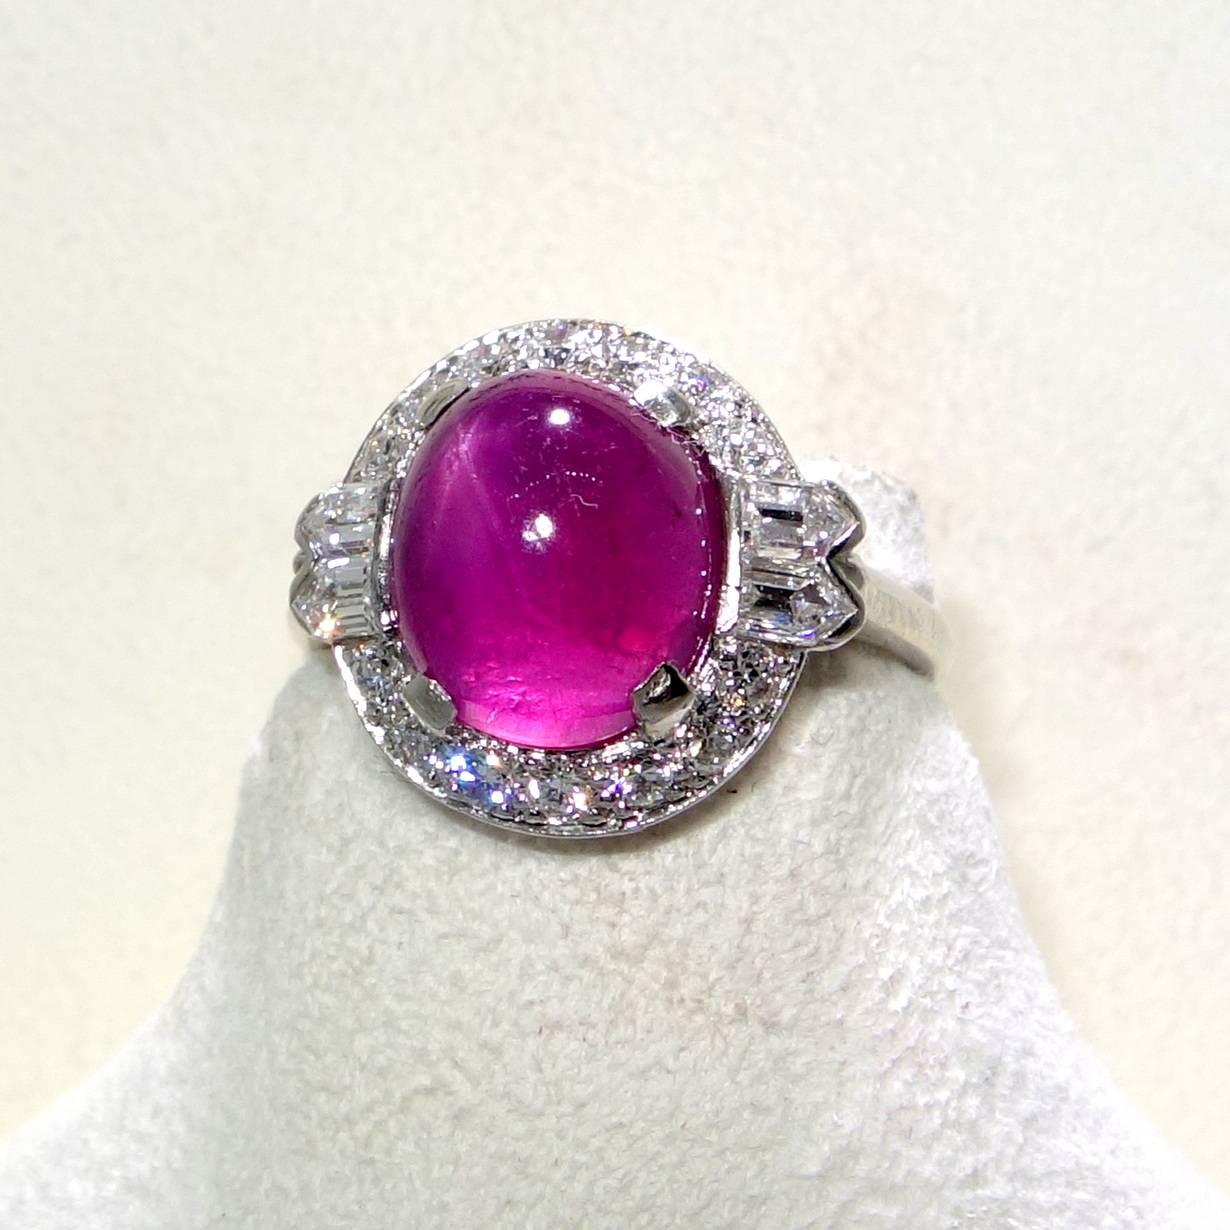 The central oval stone, weighing exactly 6.51 cts., is a fine natural unheated star ruby accented by fancy cut diamonds.  The diamonds are all well cut and are near colorless (H), approximately and slightly included to the first degree.  The